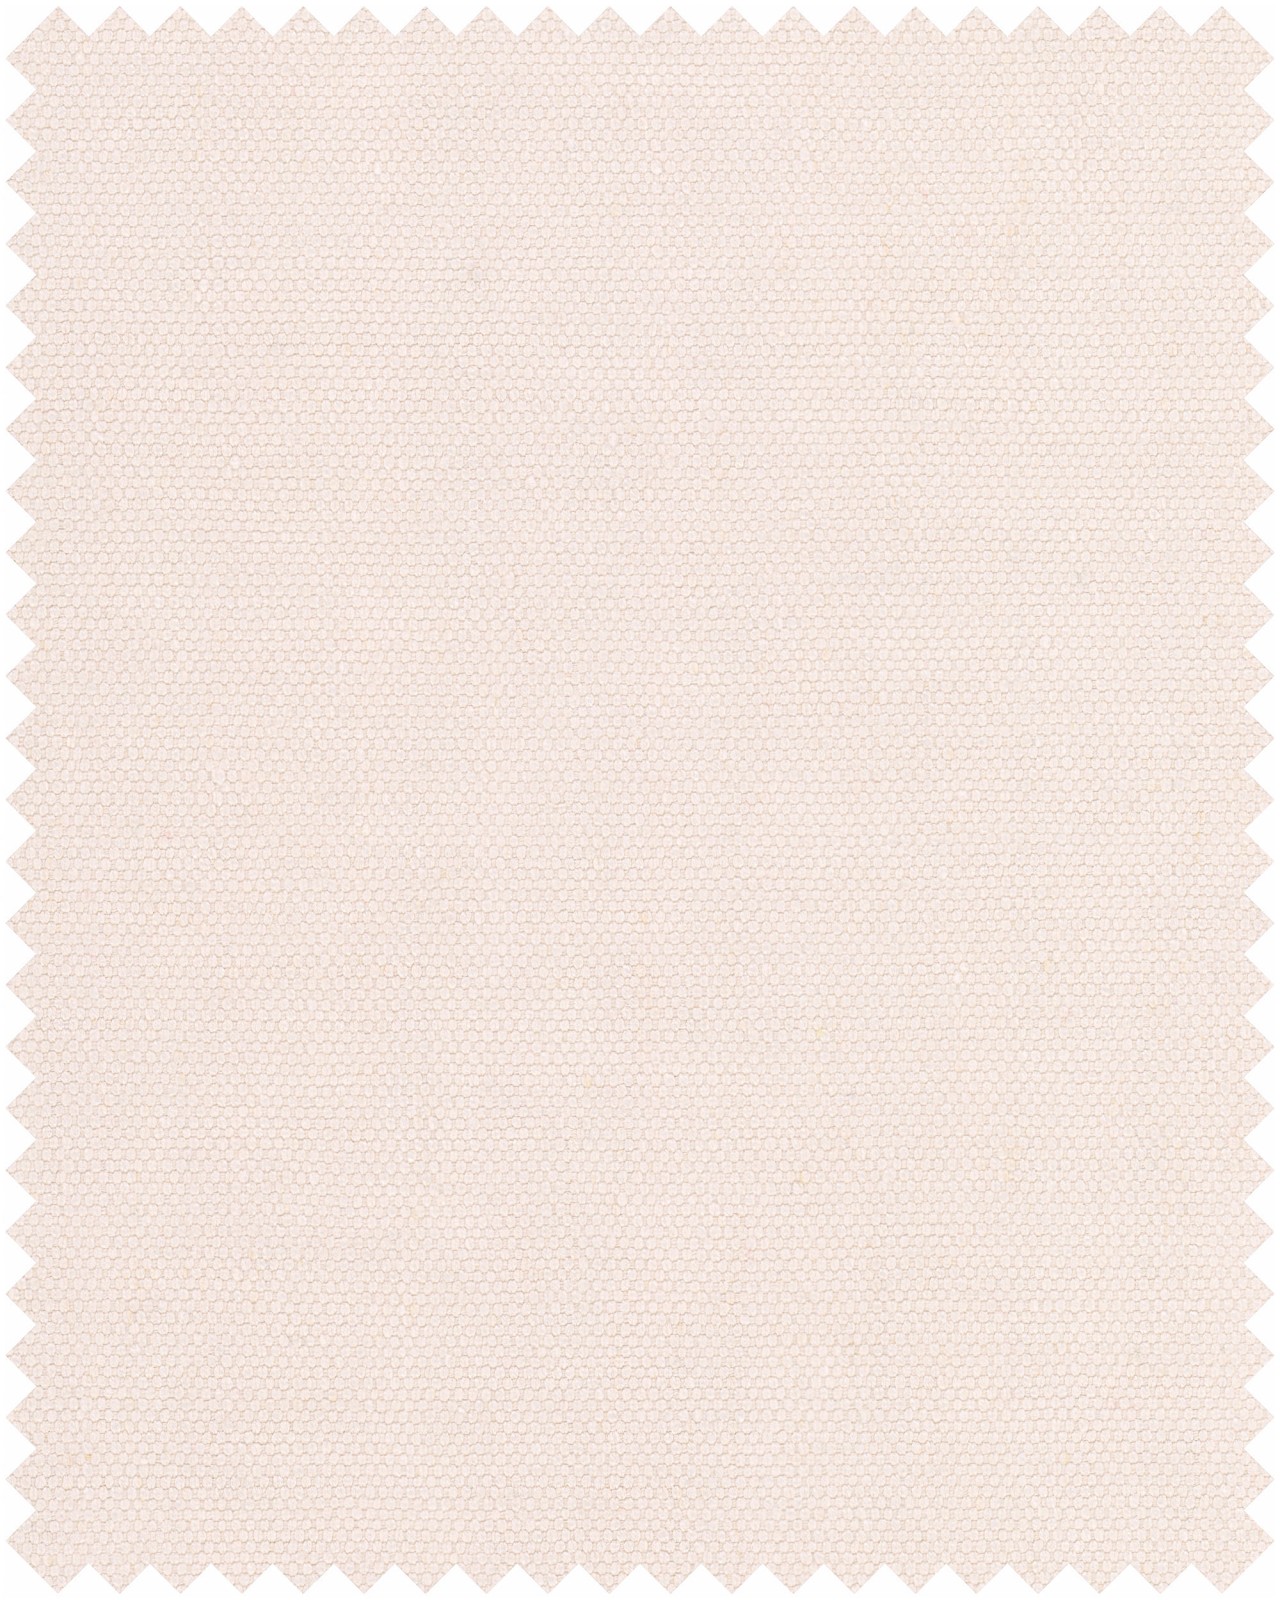 FRENCH IVORY Linen